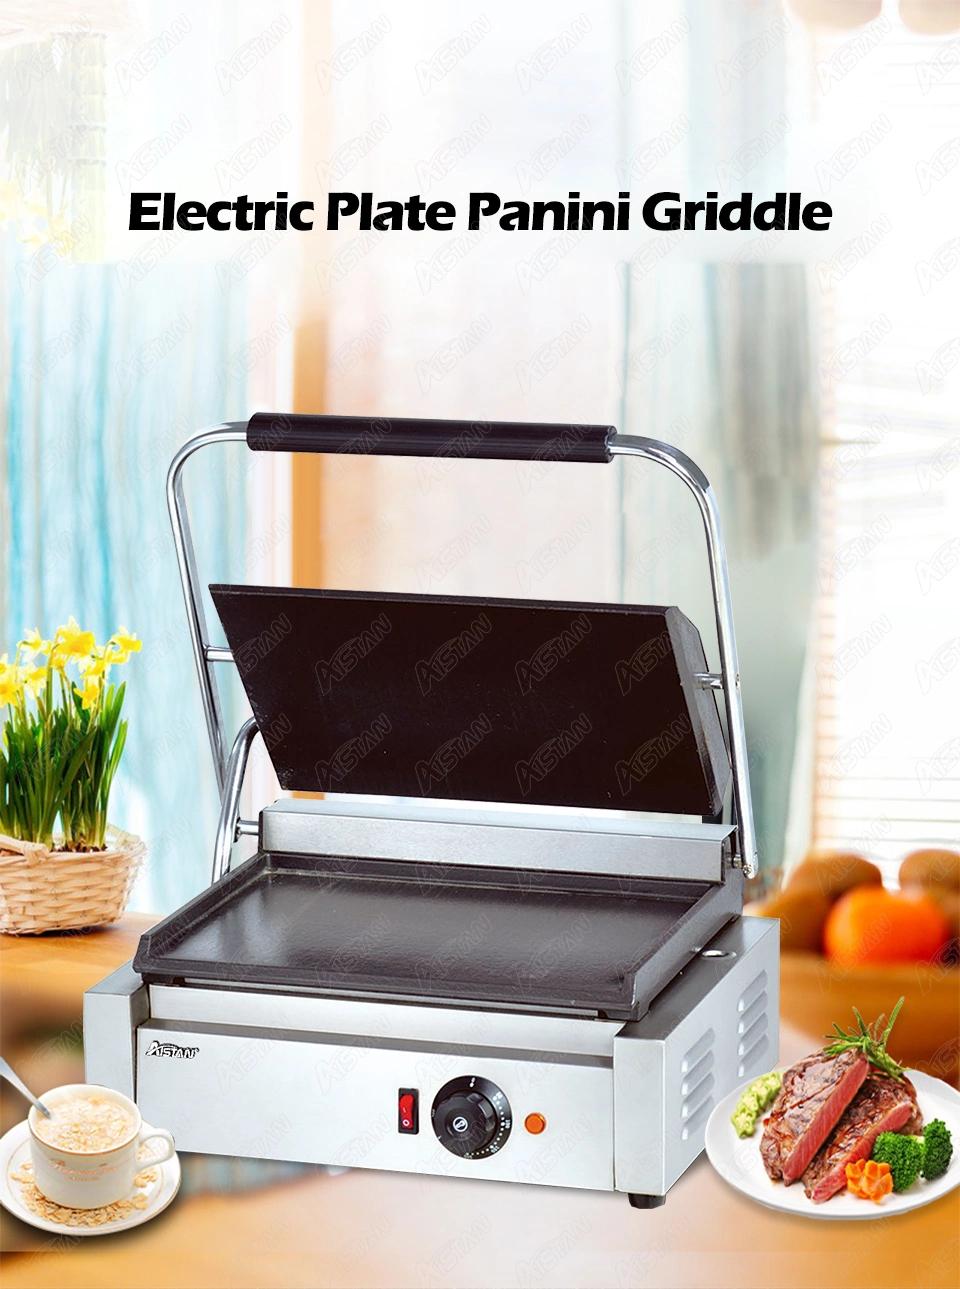 Eg813e Double Plate Nonstick Panini Press Grill, Stainless Steel Electric Sandwich Maker, Flat Press Plate, 4.4kw